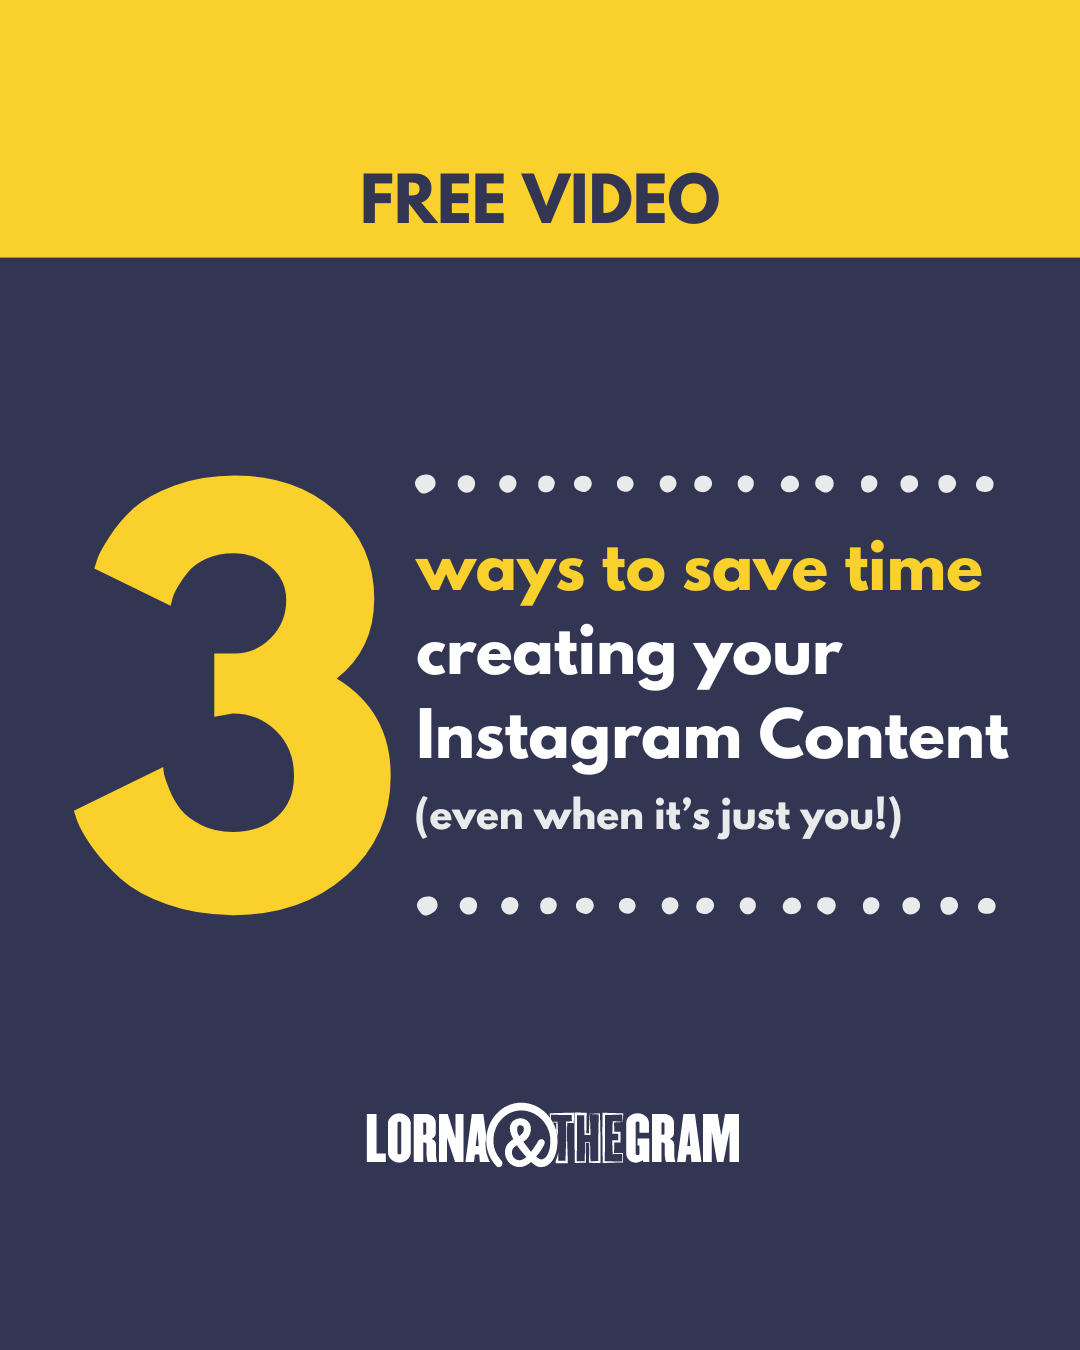 3 ways to save time creating your Instagram Content